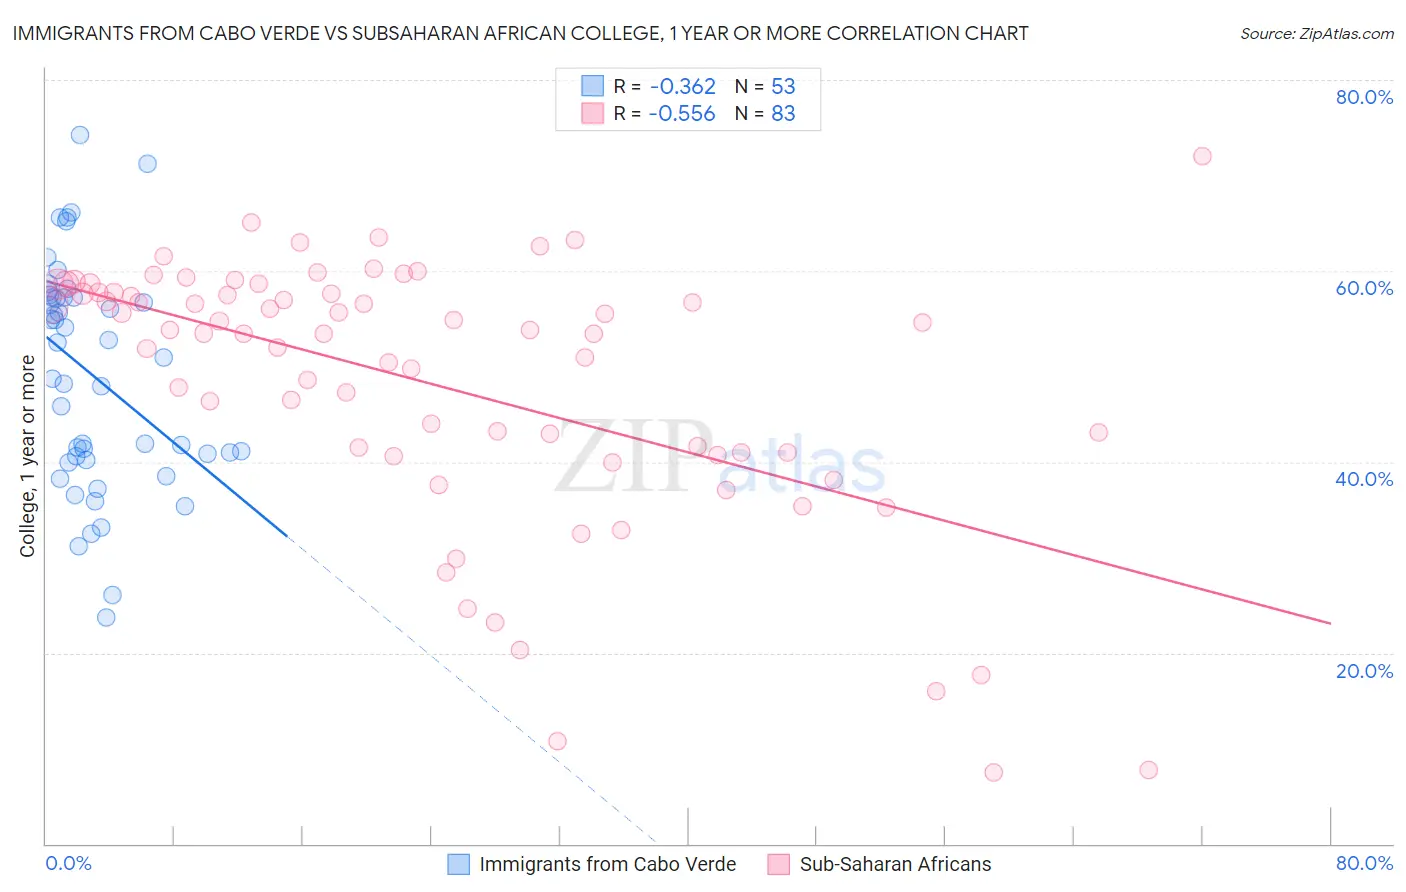 Immigrants from Cabo Verde vs Subsaharan African College, 1 year or more